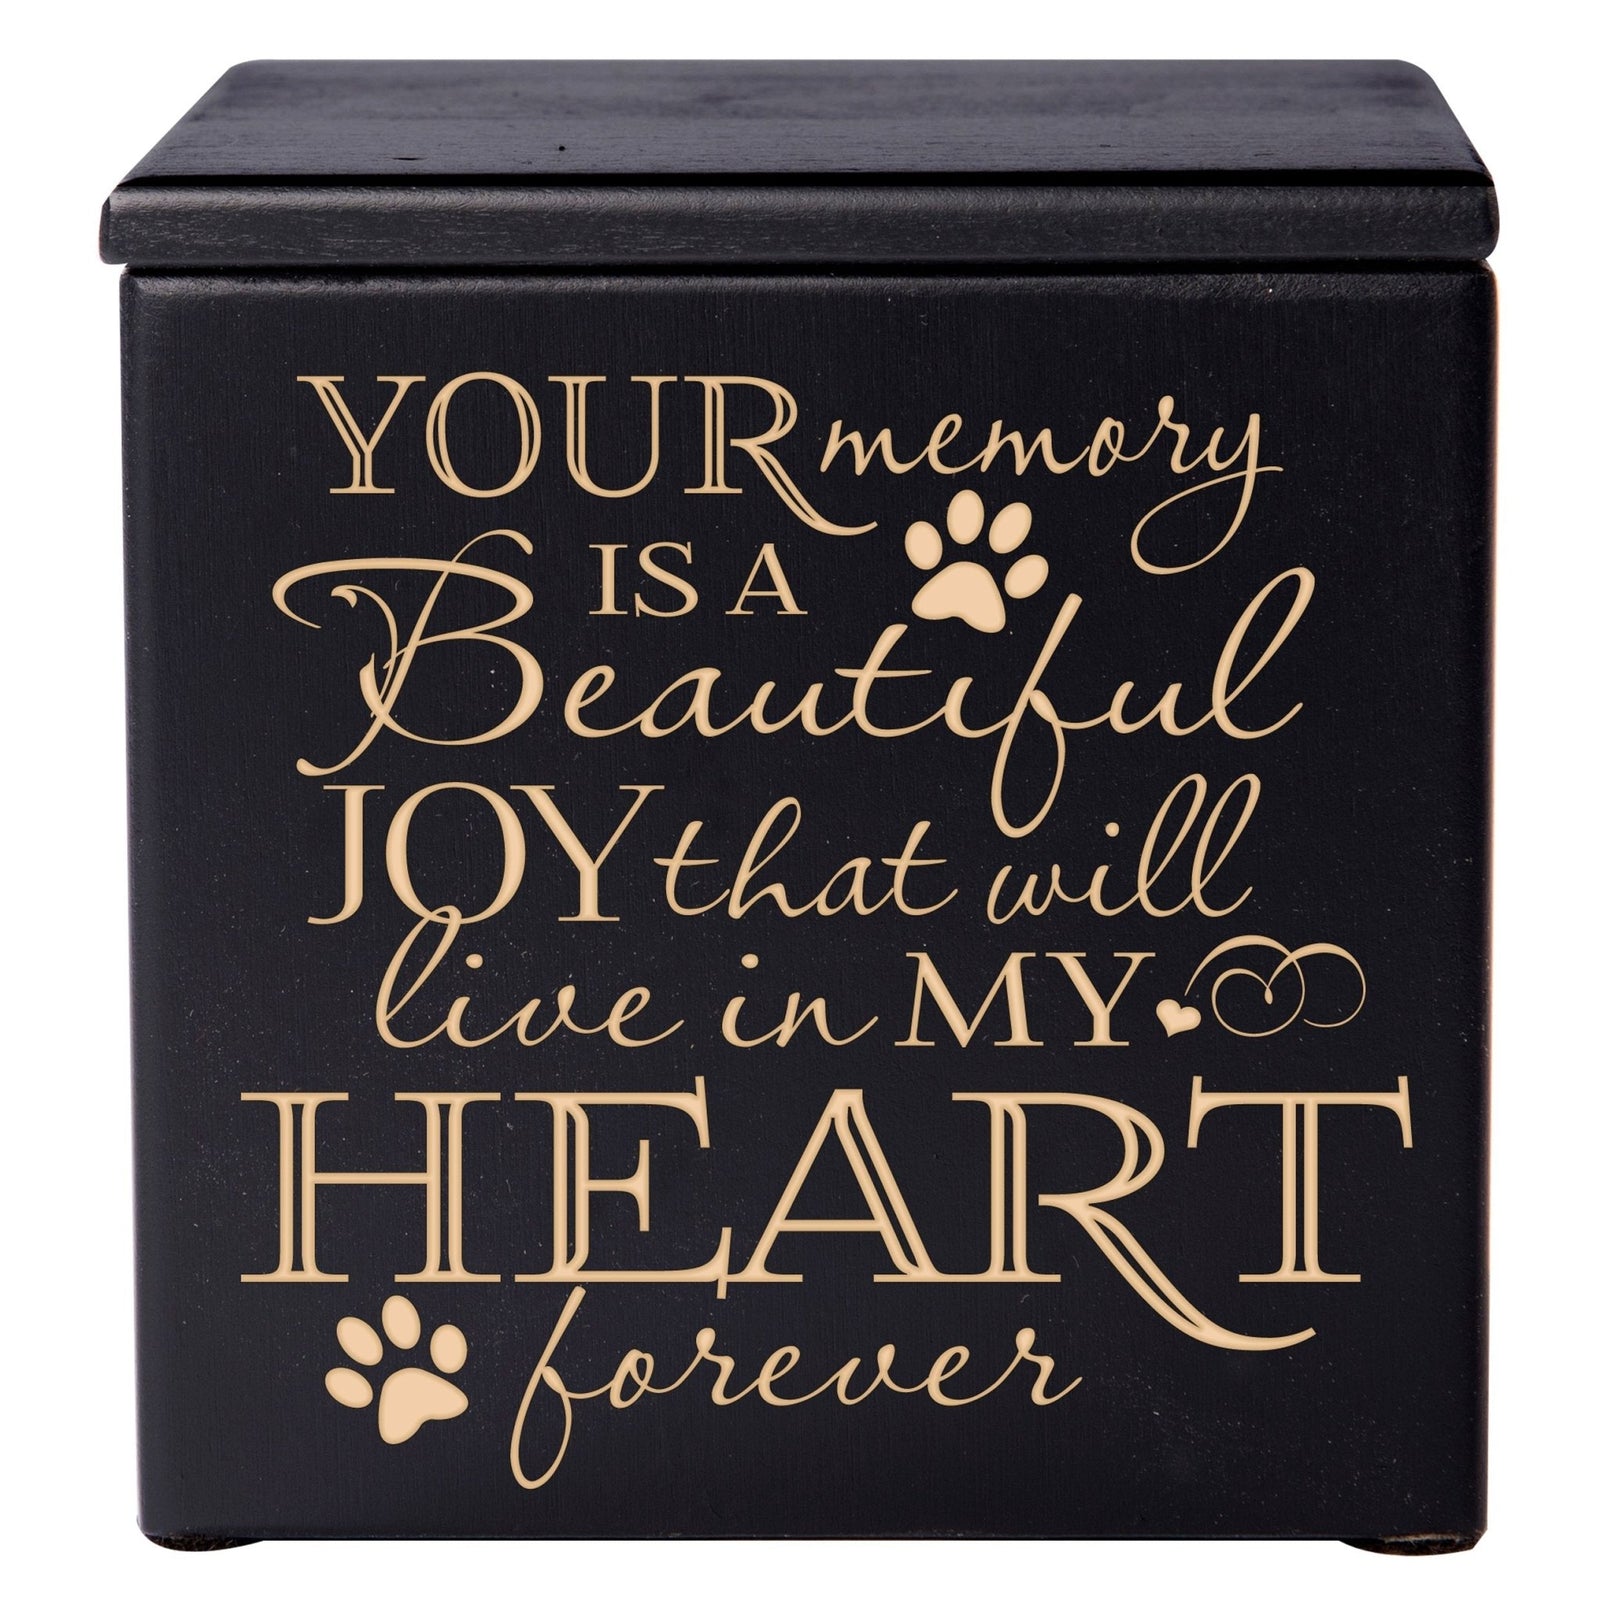 Pet Memorial Keepsake Cremation Urn Box for Dog or Cat - Your Memory Is A Beautiful Joy - LifeSong Milestones